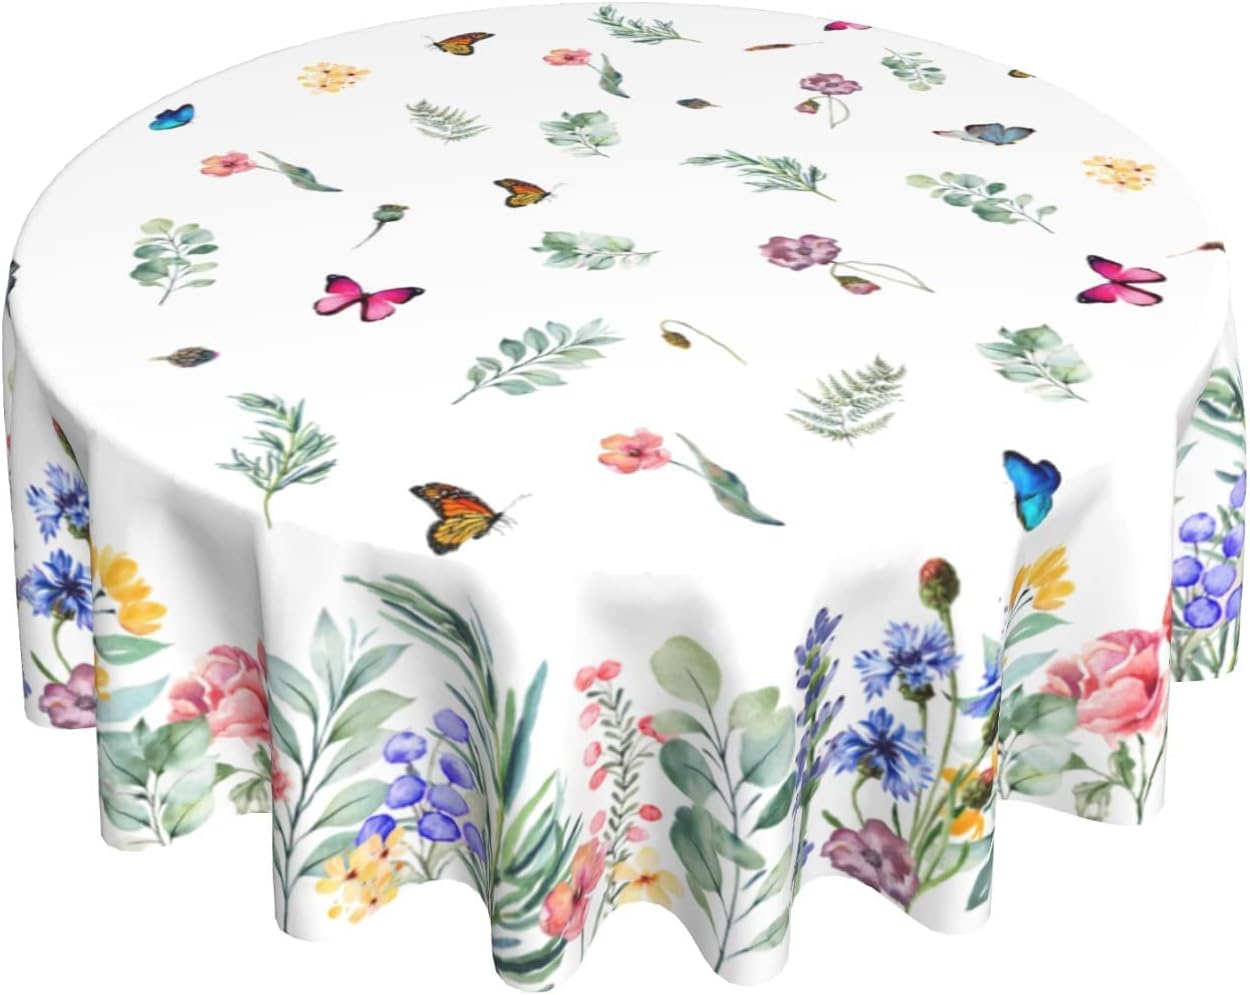 ABSOP Spring Summer Floral Tablecloth Round 60 Inch Watercolor Butterfly Flower Table Cloth Washable Farmhouse Table Covers Kitchen Holiday Picnic Party Dinner Room Picnic Outdoor Decor, White-02